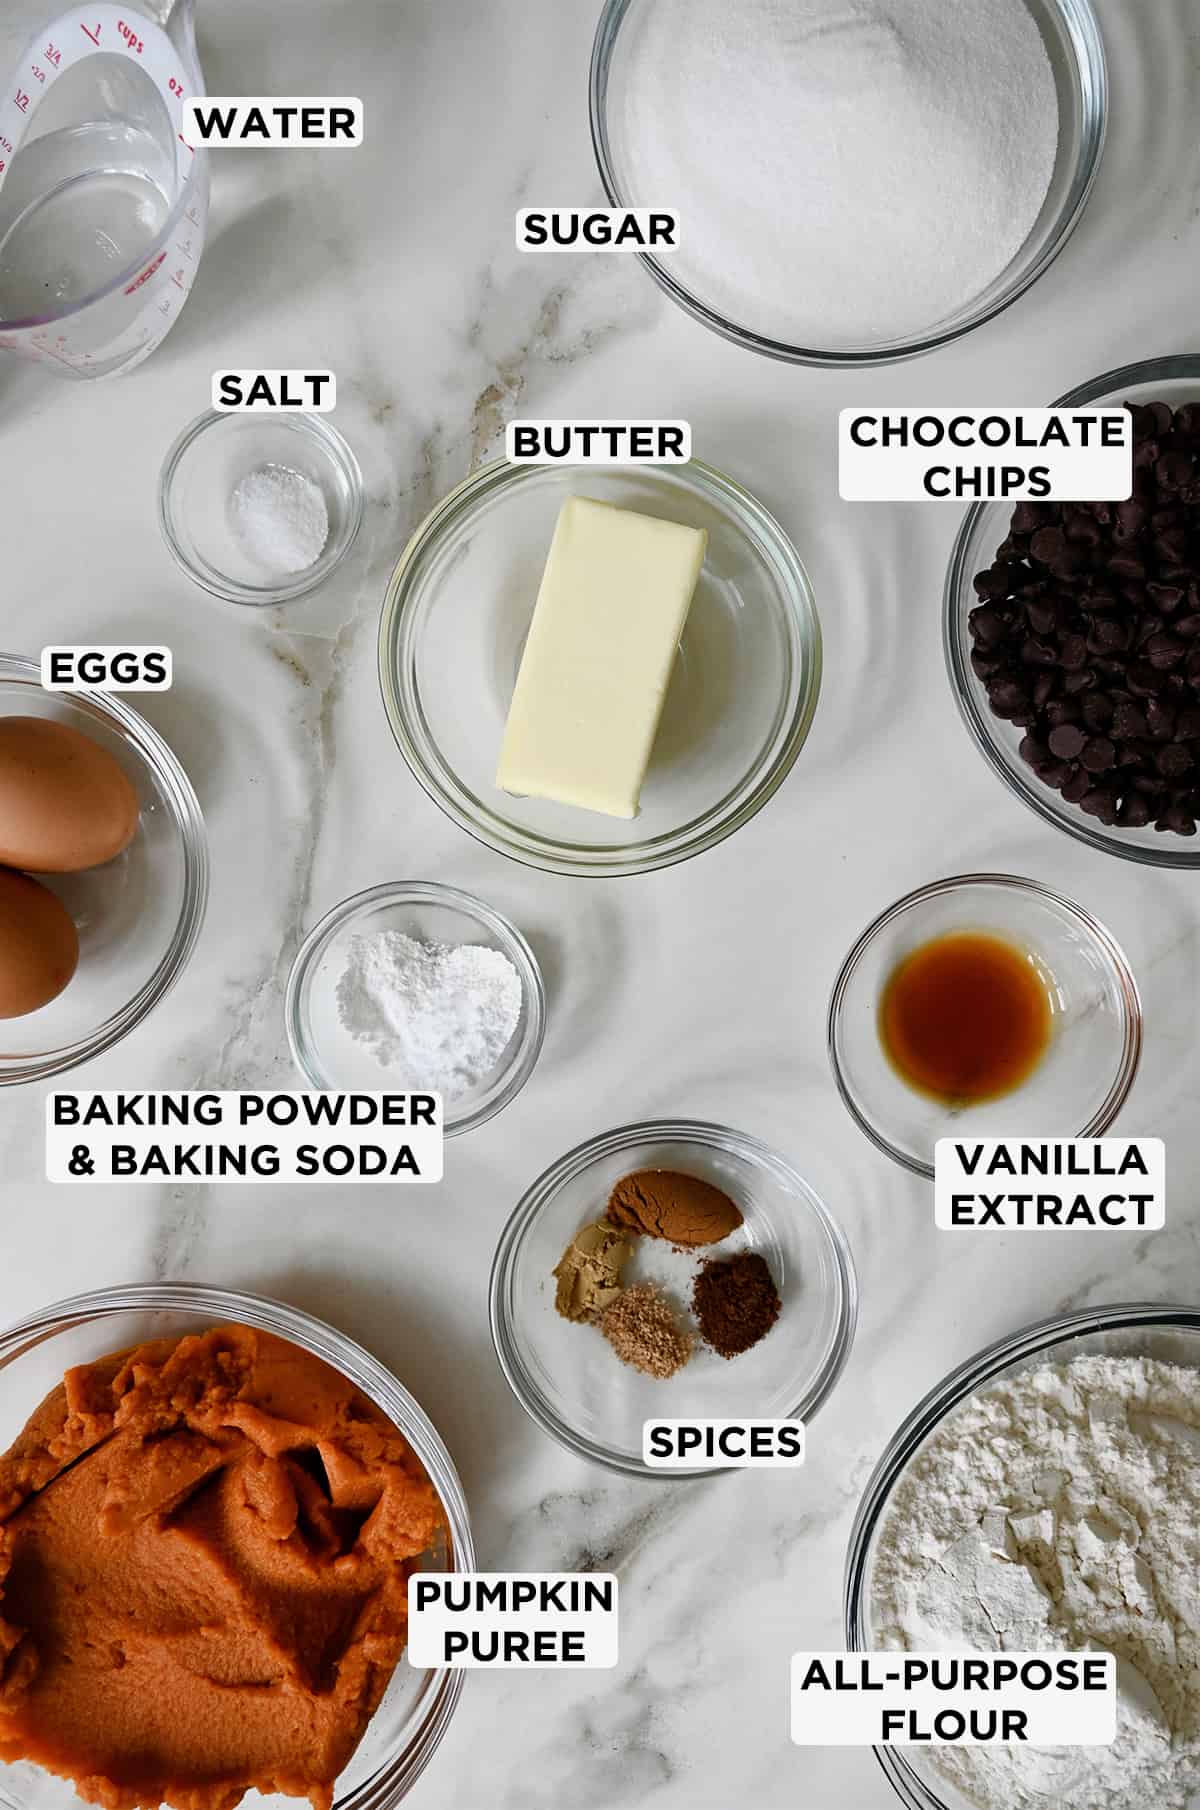 Bowls of ingredients (flour, pumpkin puree, spices, vanilla extract, baking powder and soda, eggs, butter, chocolate chips, salt, sugar, water) on a marble surface.